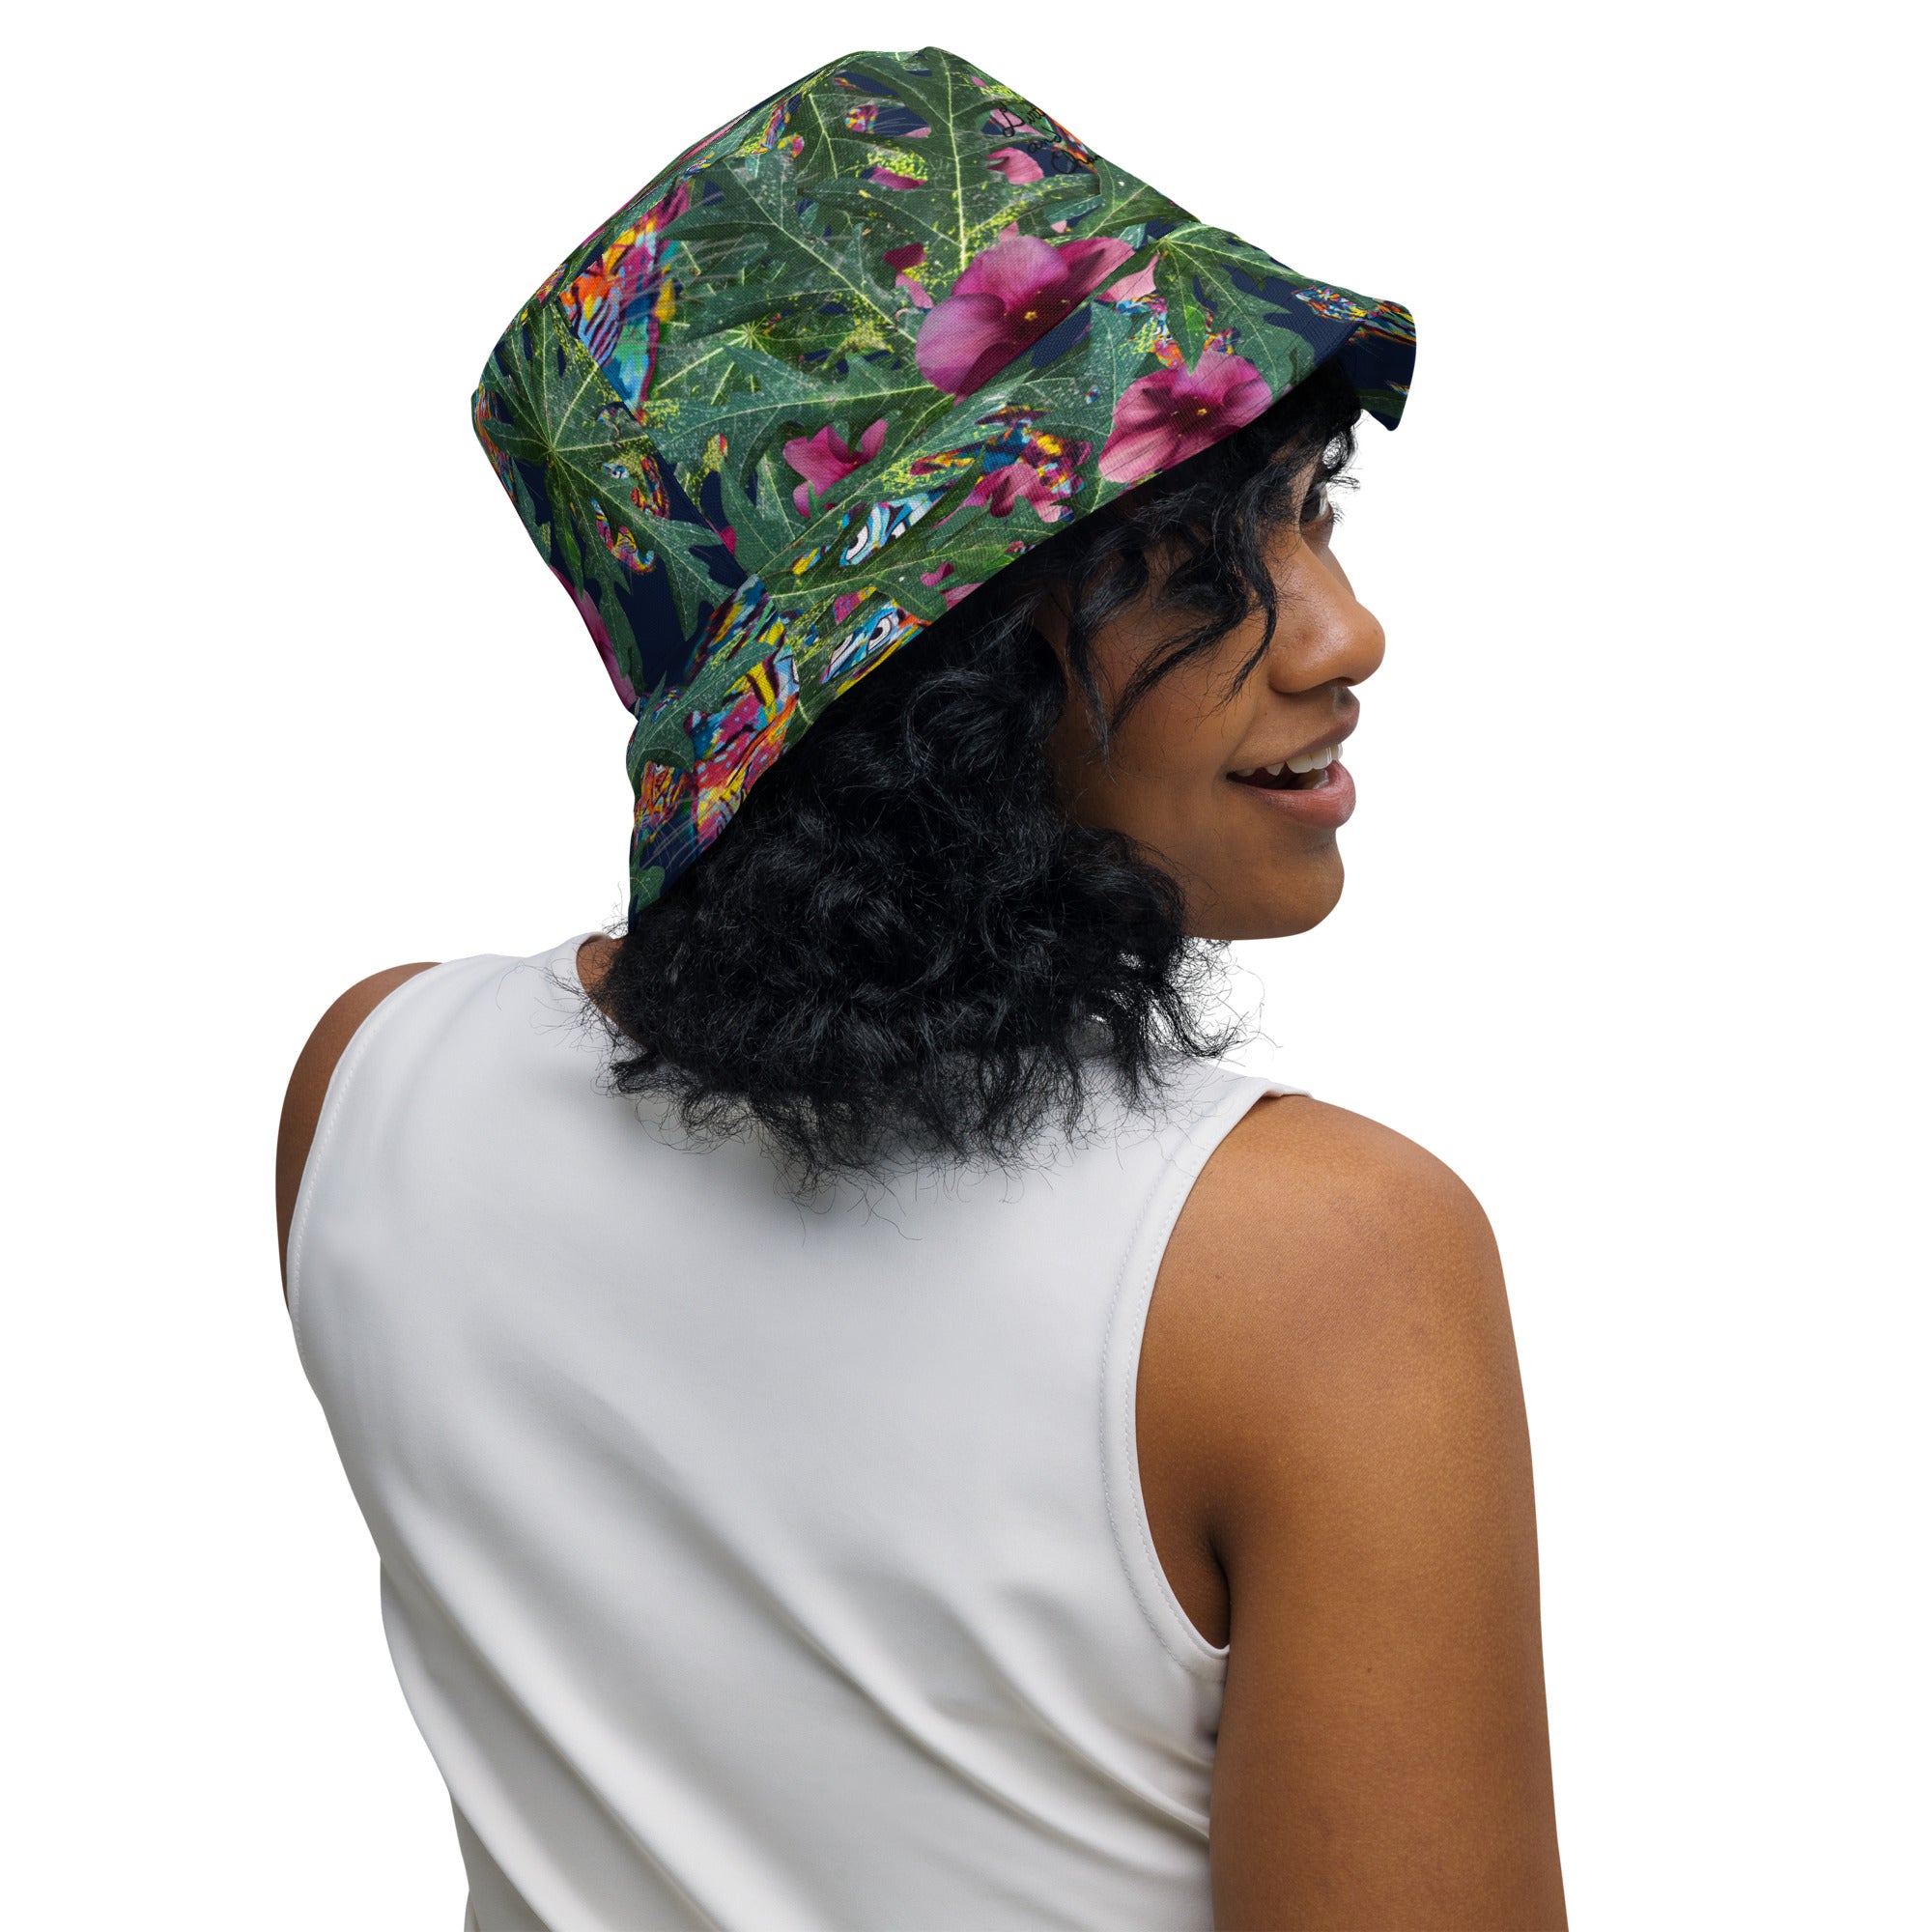 6 eyed tiger flora and fauna Reversible bucket hat